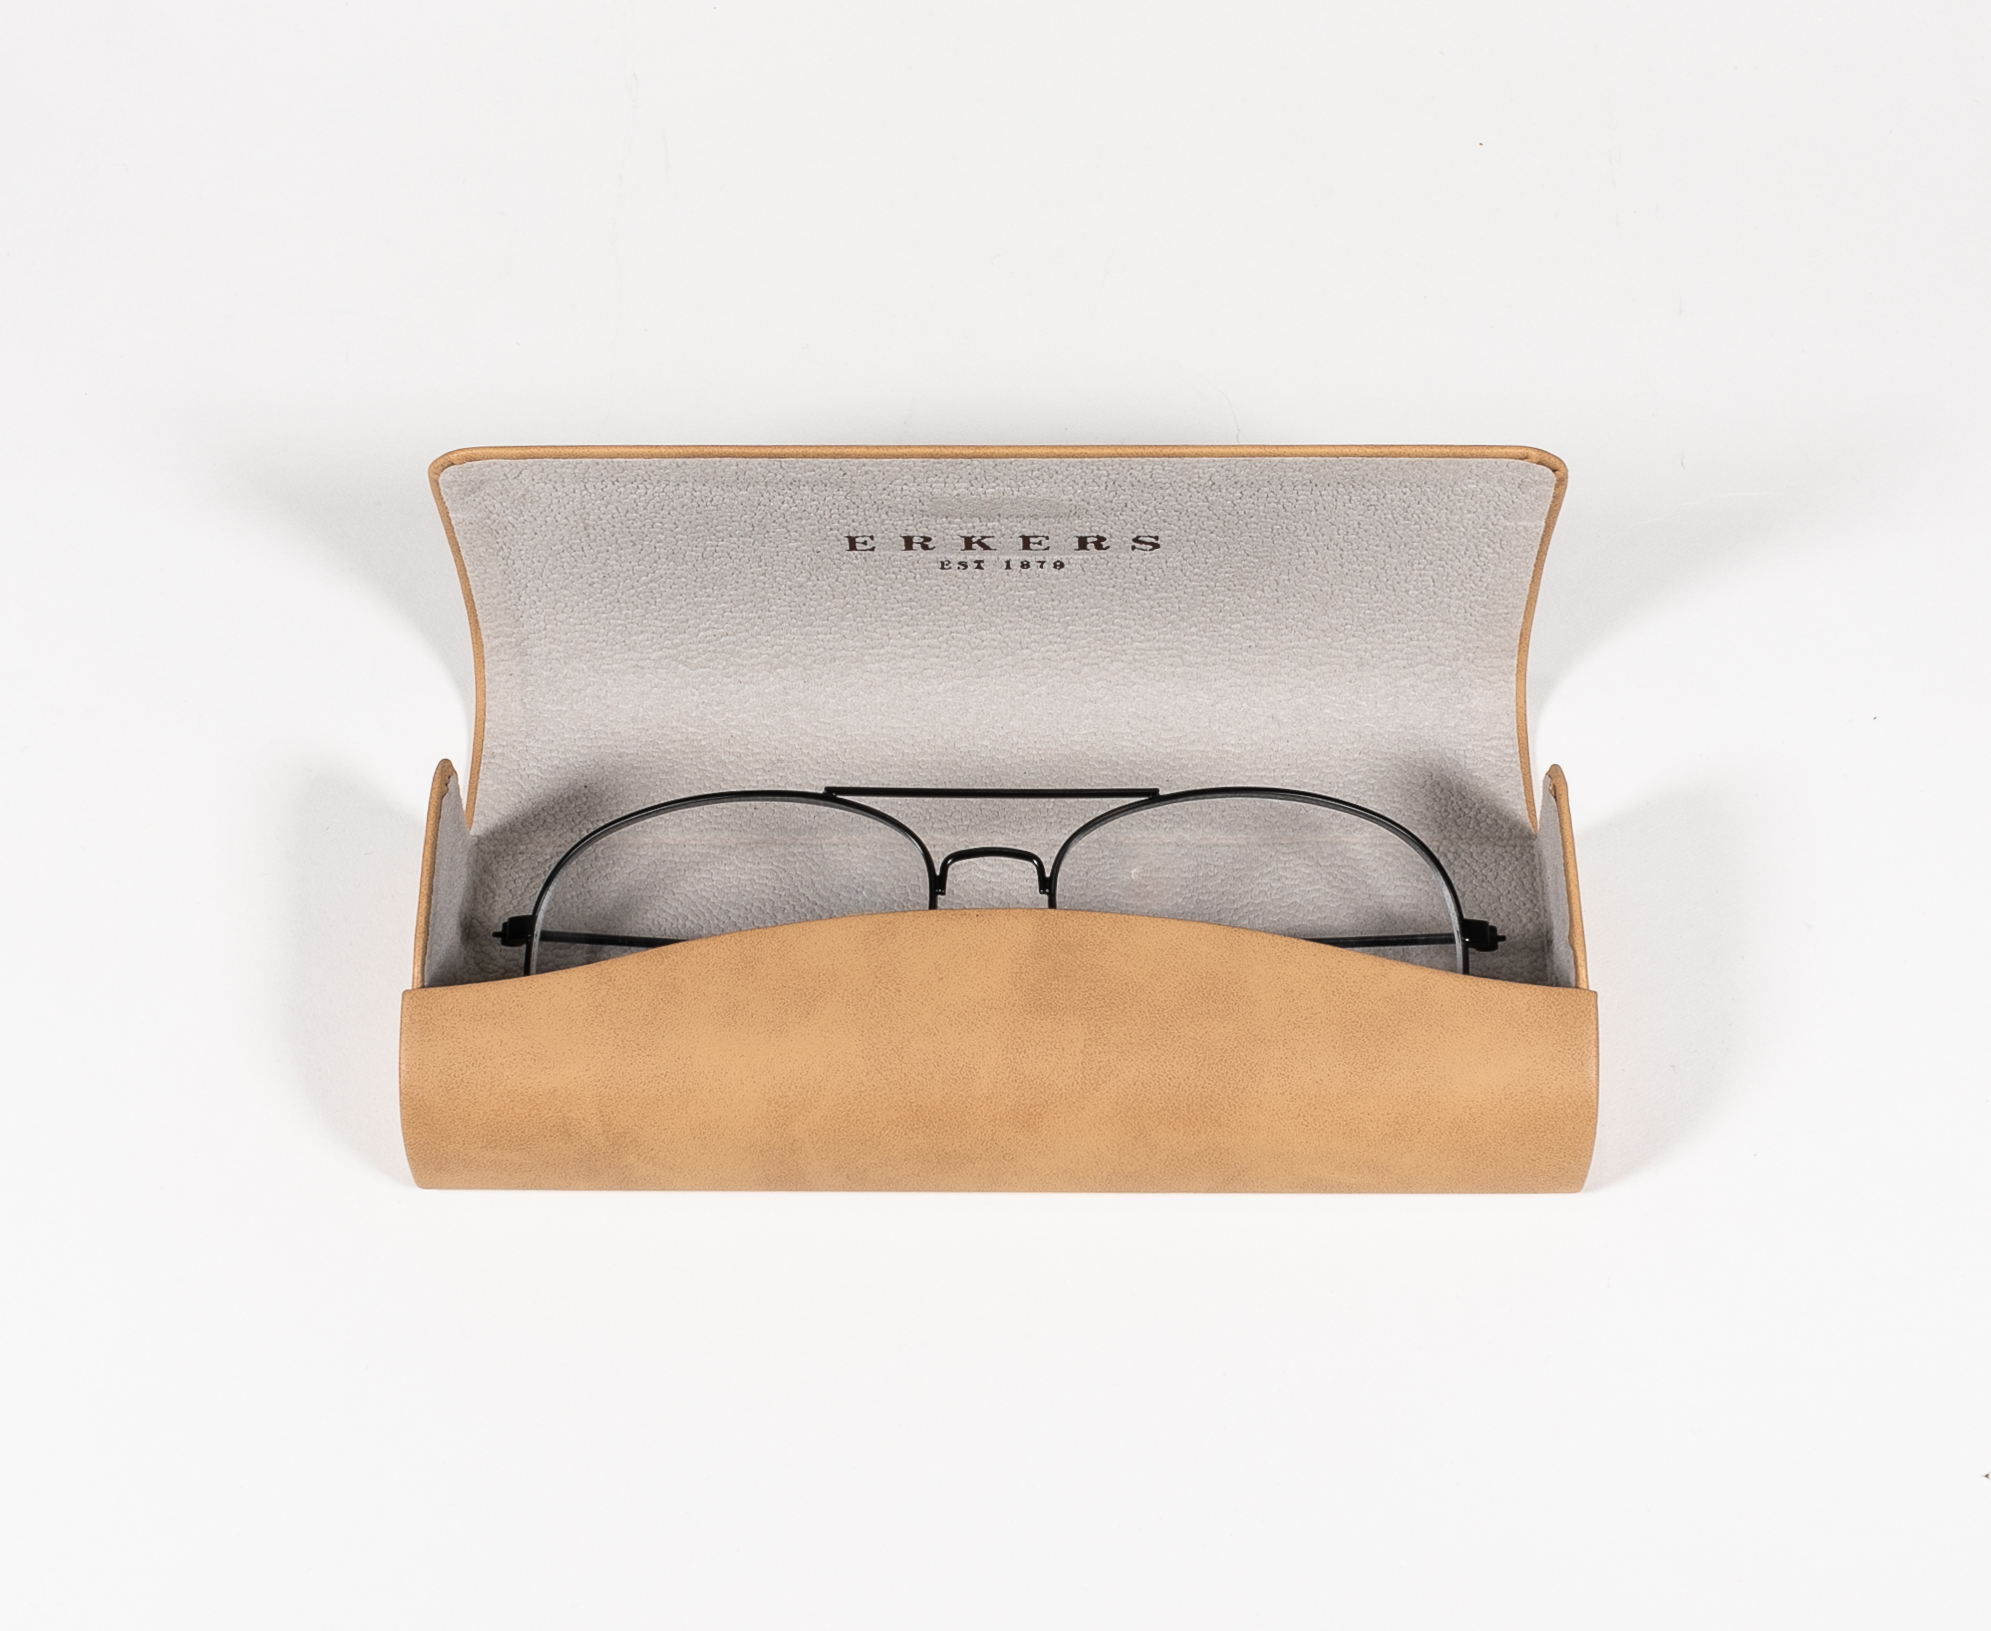 The 2021 Sunglasses, in Three Colors, Feature A Semi-circular Handmade Case on The Side